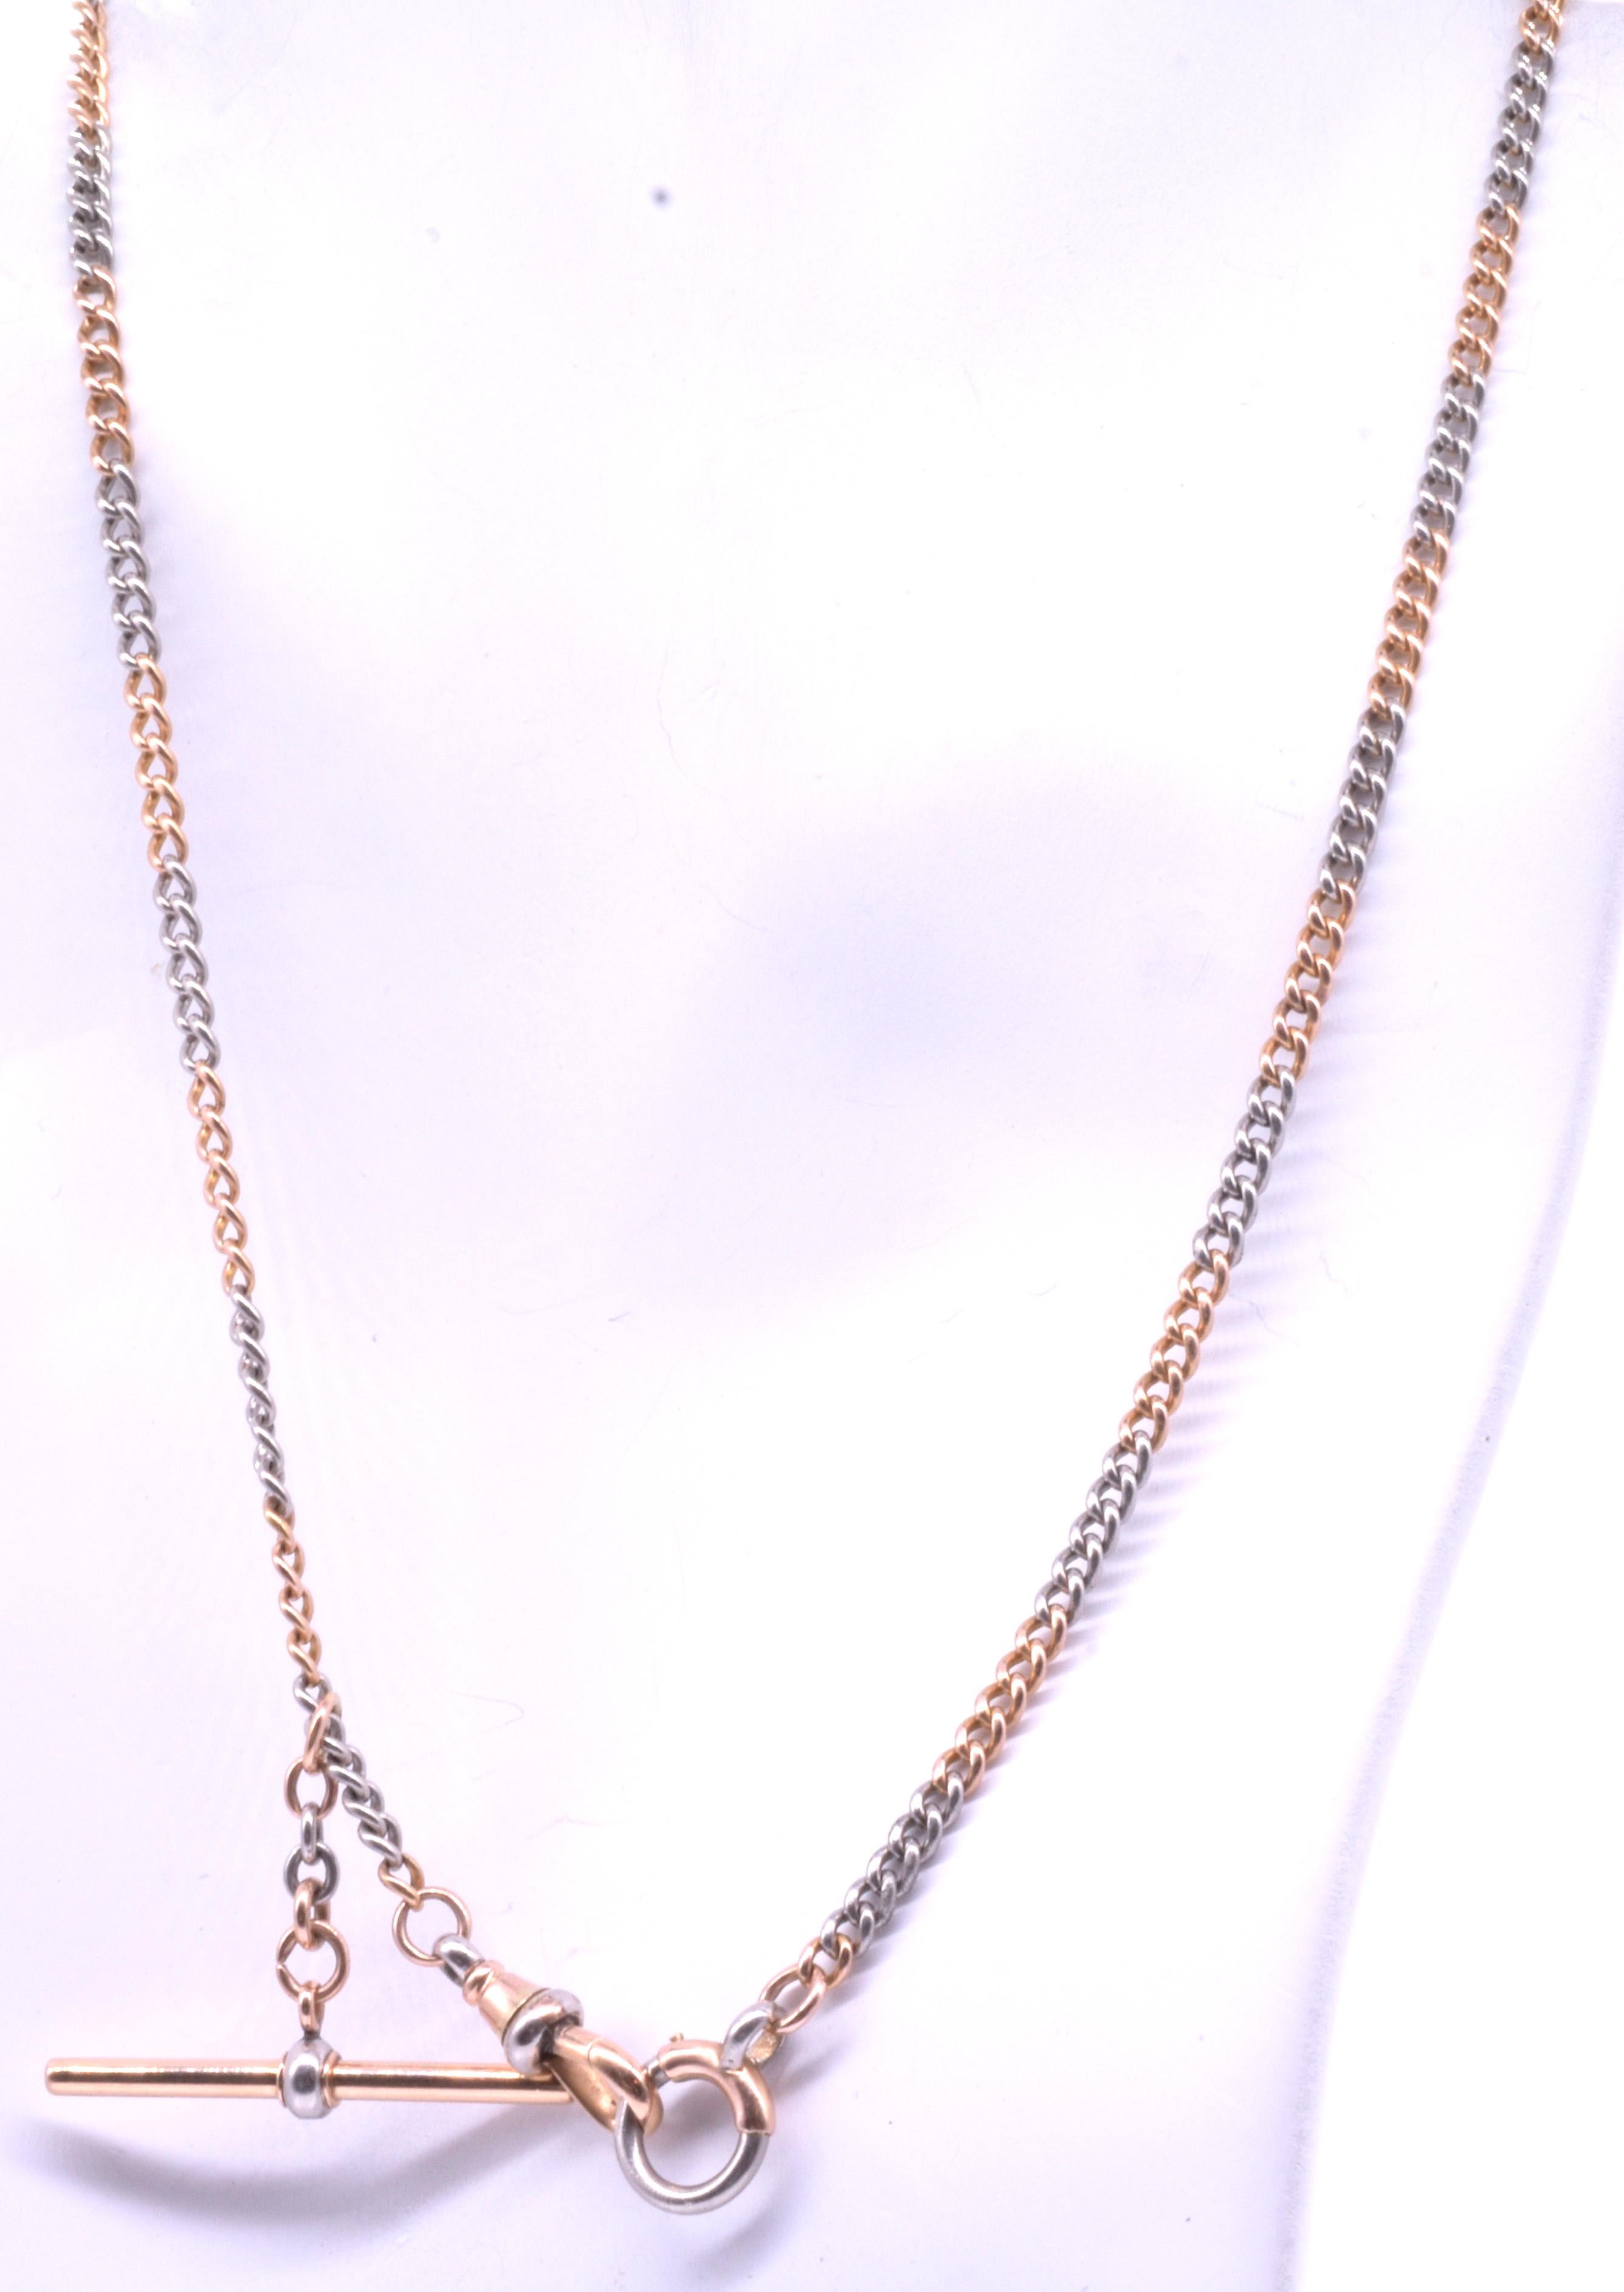 This 20 inch long Albert curb link chain is a classic to add to your jewelry wardrobe. With its round bolt clip and dog tag and T-Bar, all with alternating platinum and gold 2 color design, you can clip on your favorite gold or silver pendant (both